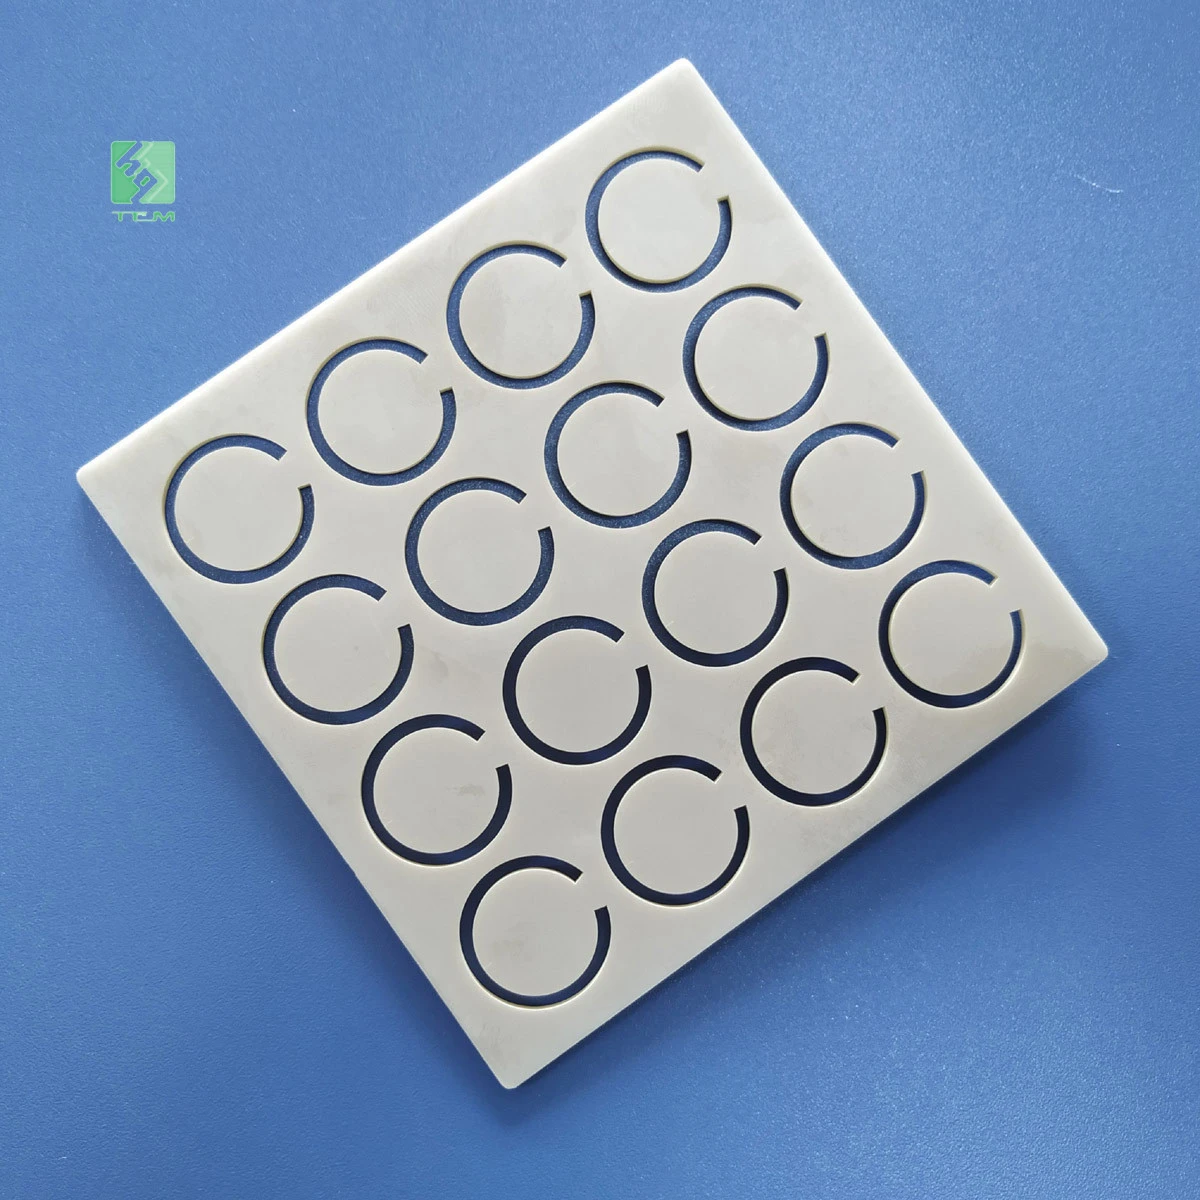 Electrical Ceramic Substrate Aluminum Nitride ceramic Plate  AlN ceramic With High Thermal Conductivity